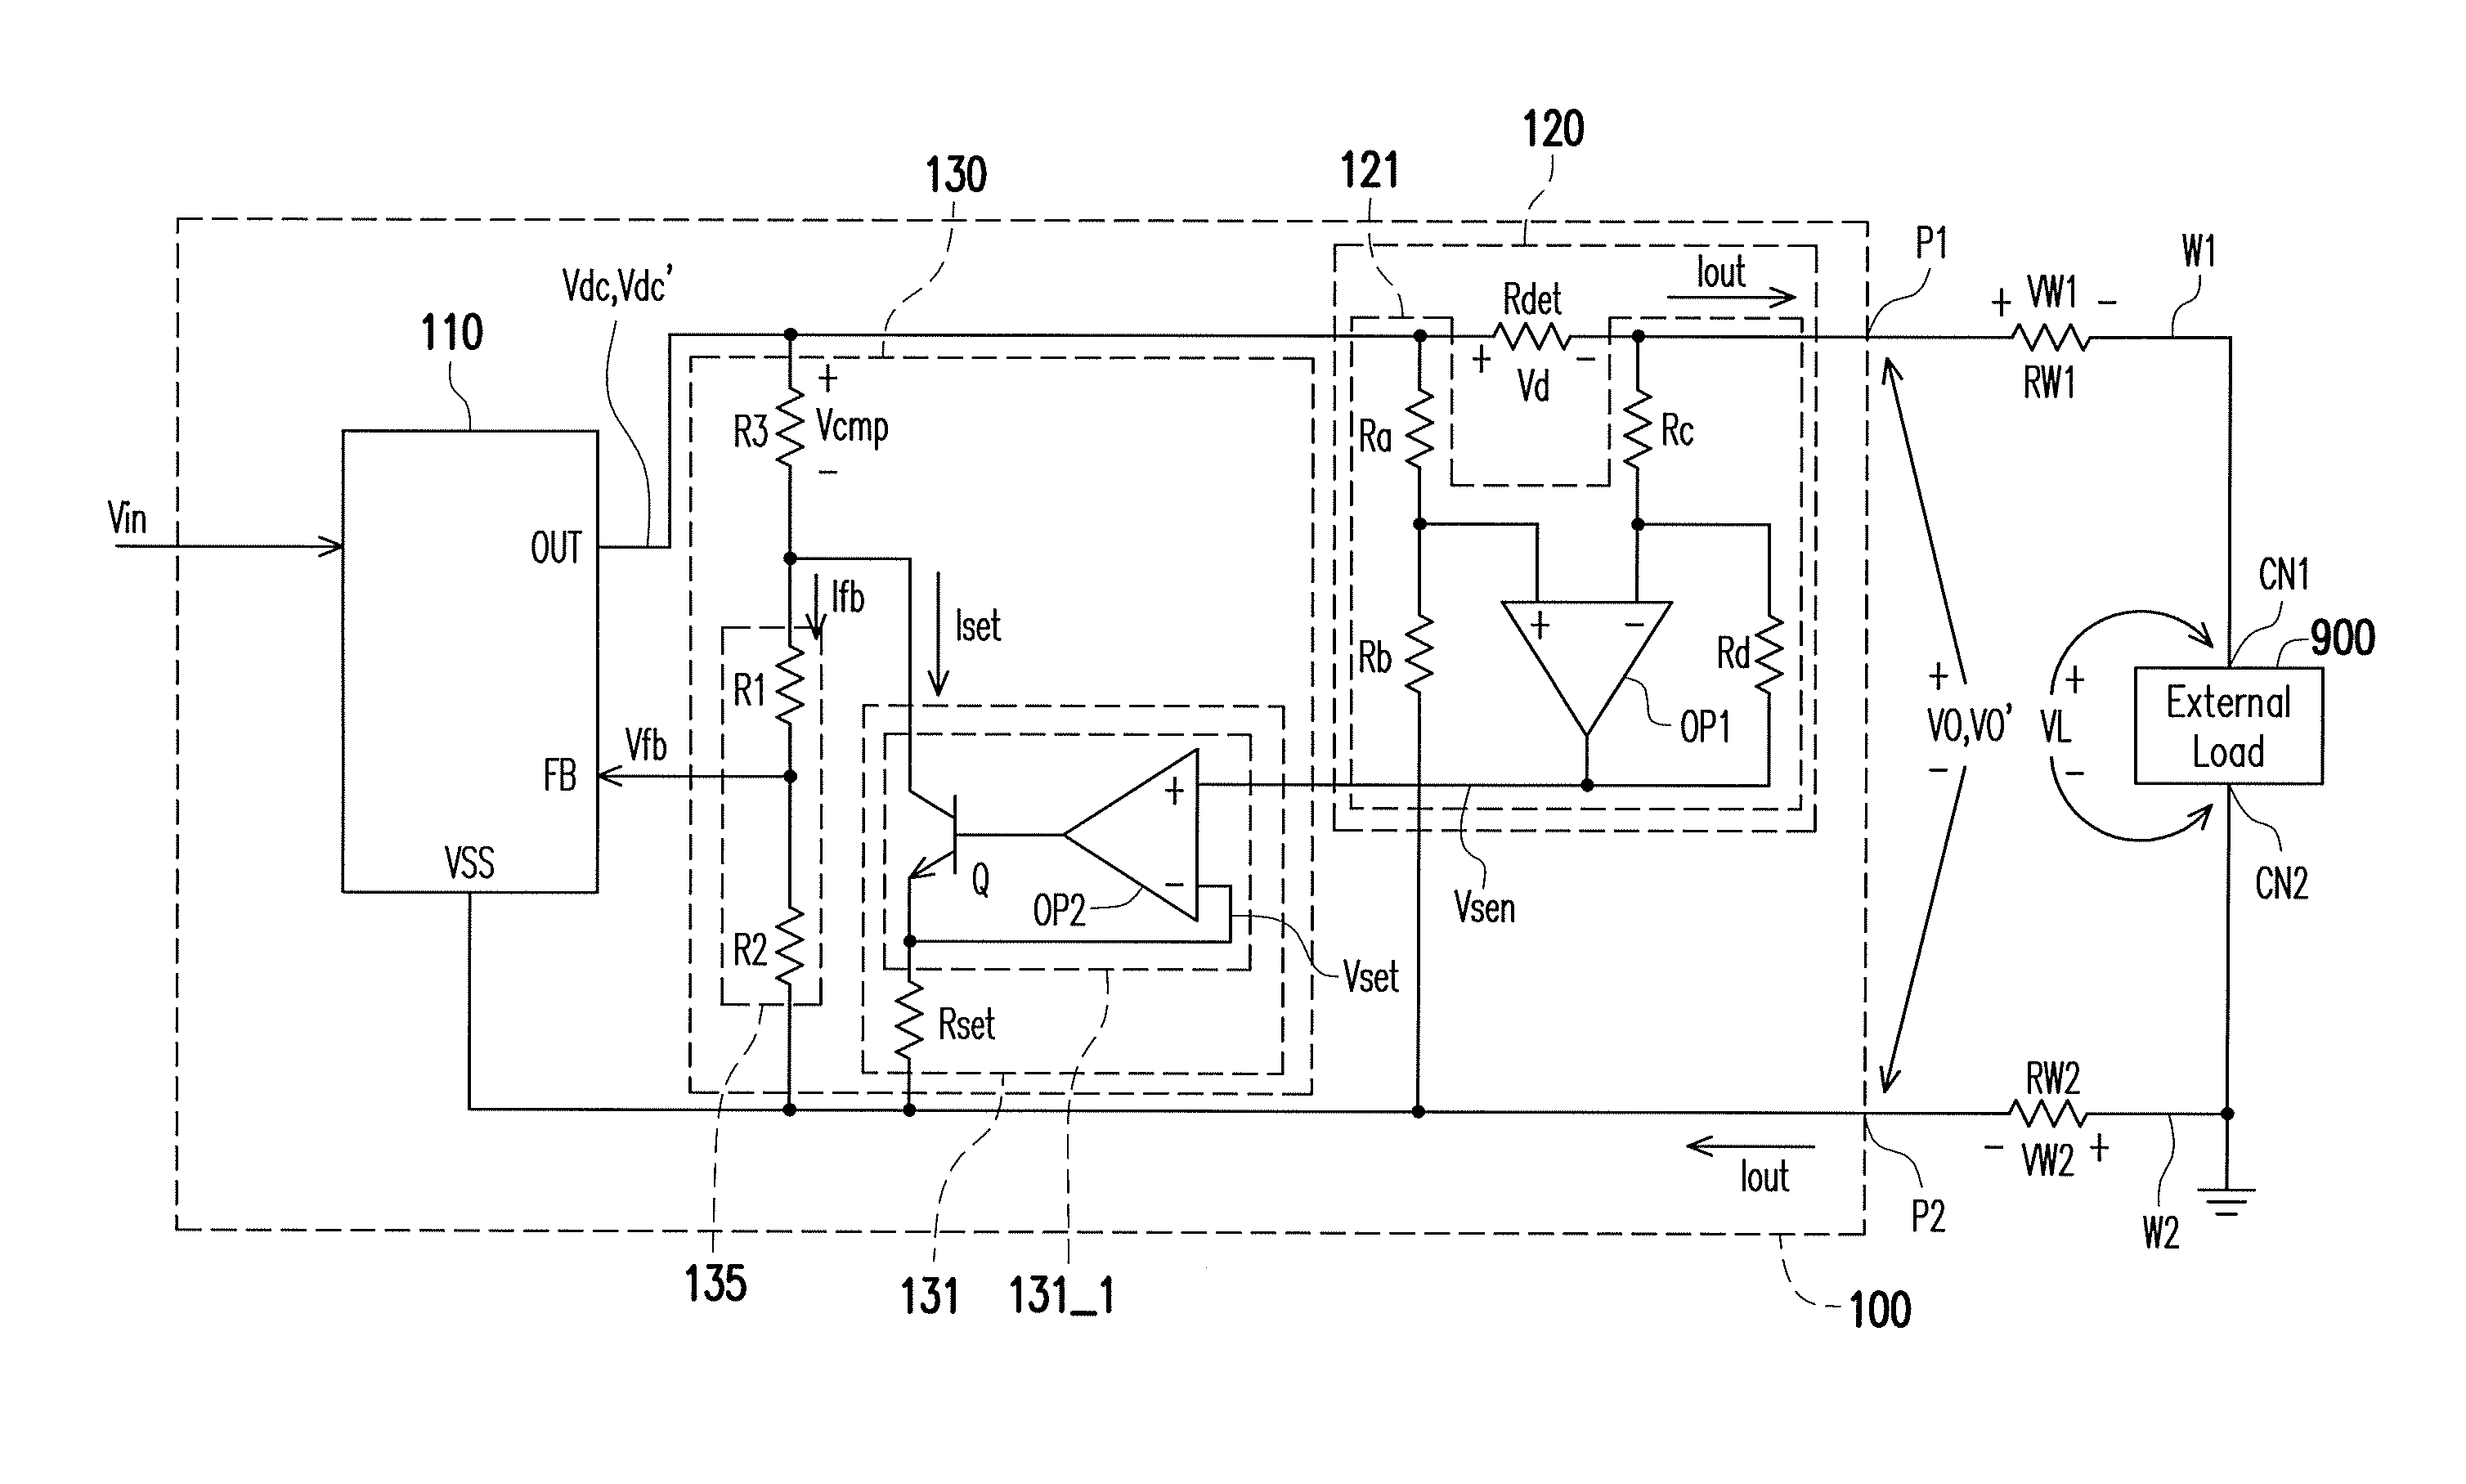 Power supply apparatus with cable voltage drop compensation